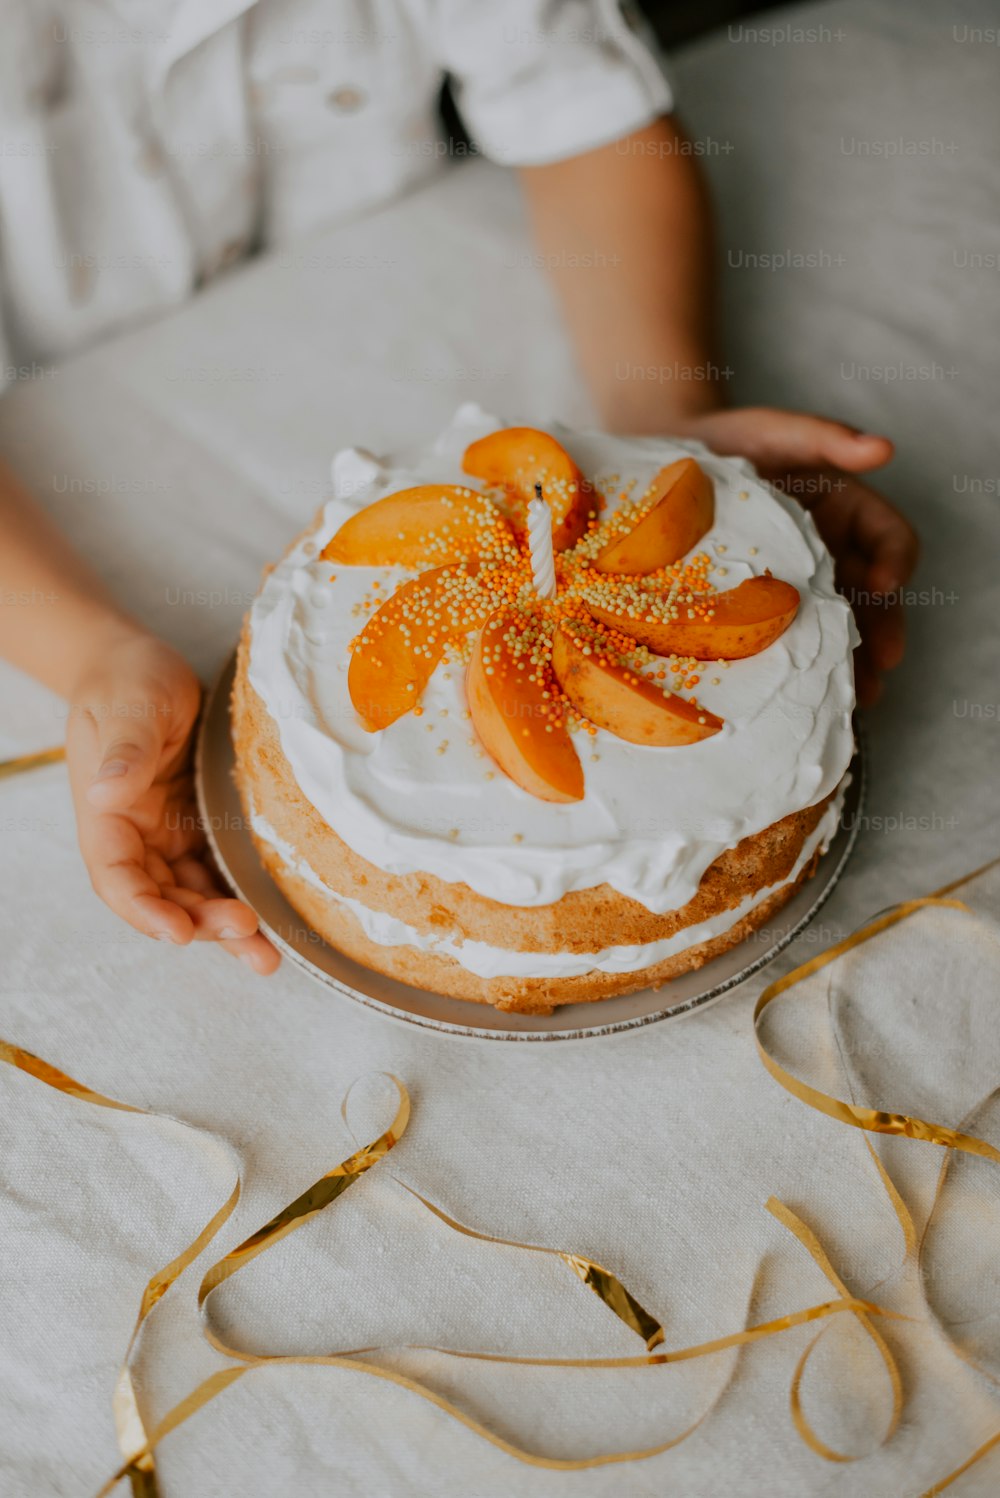 a person holding a cake with orange slices on it